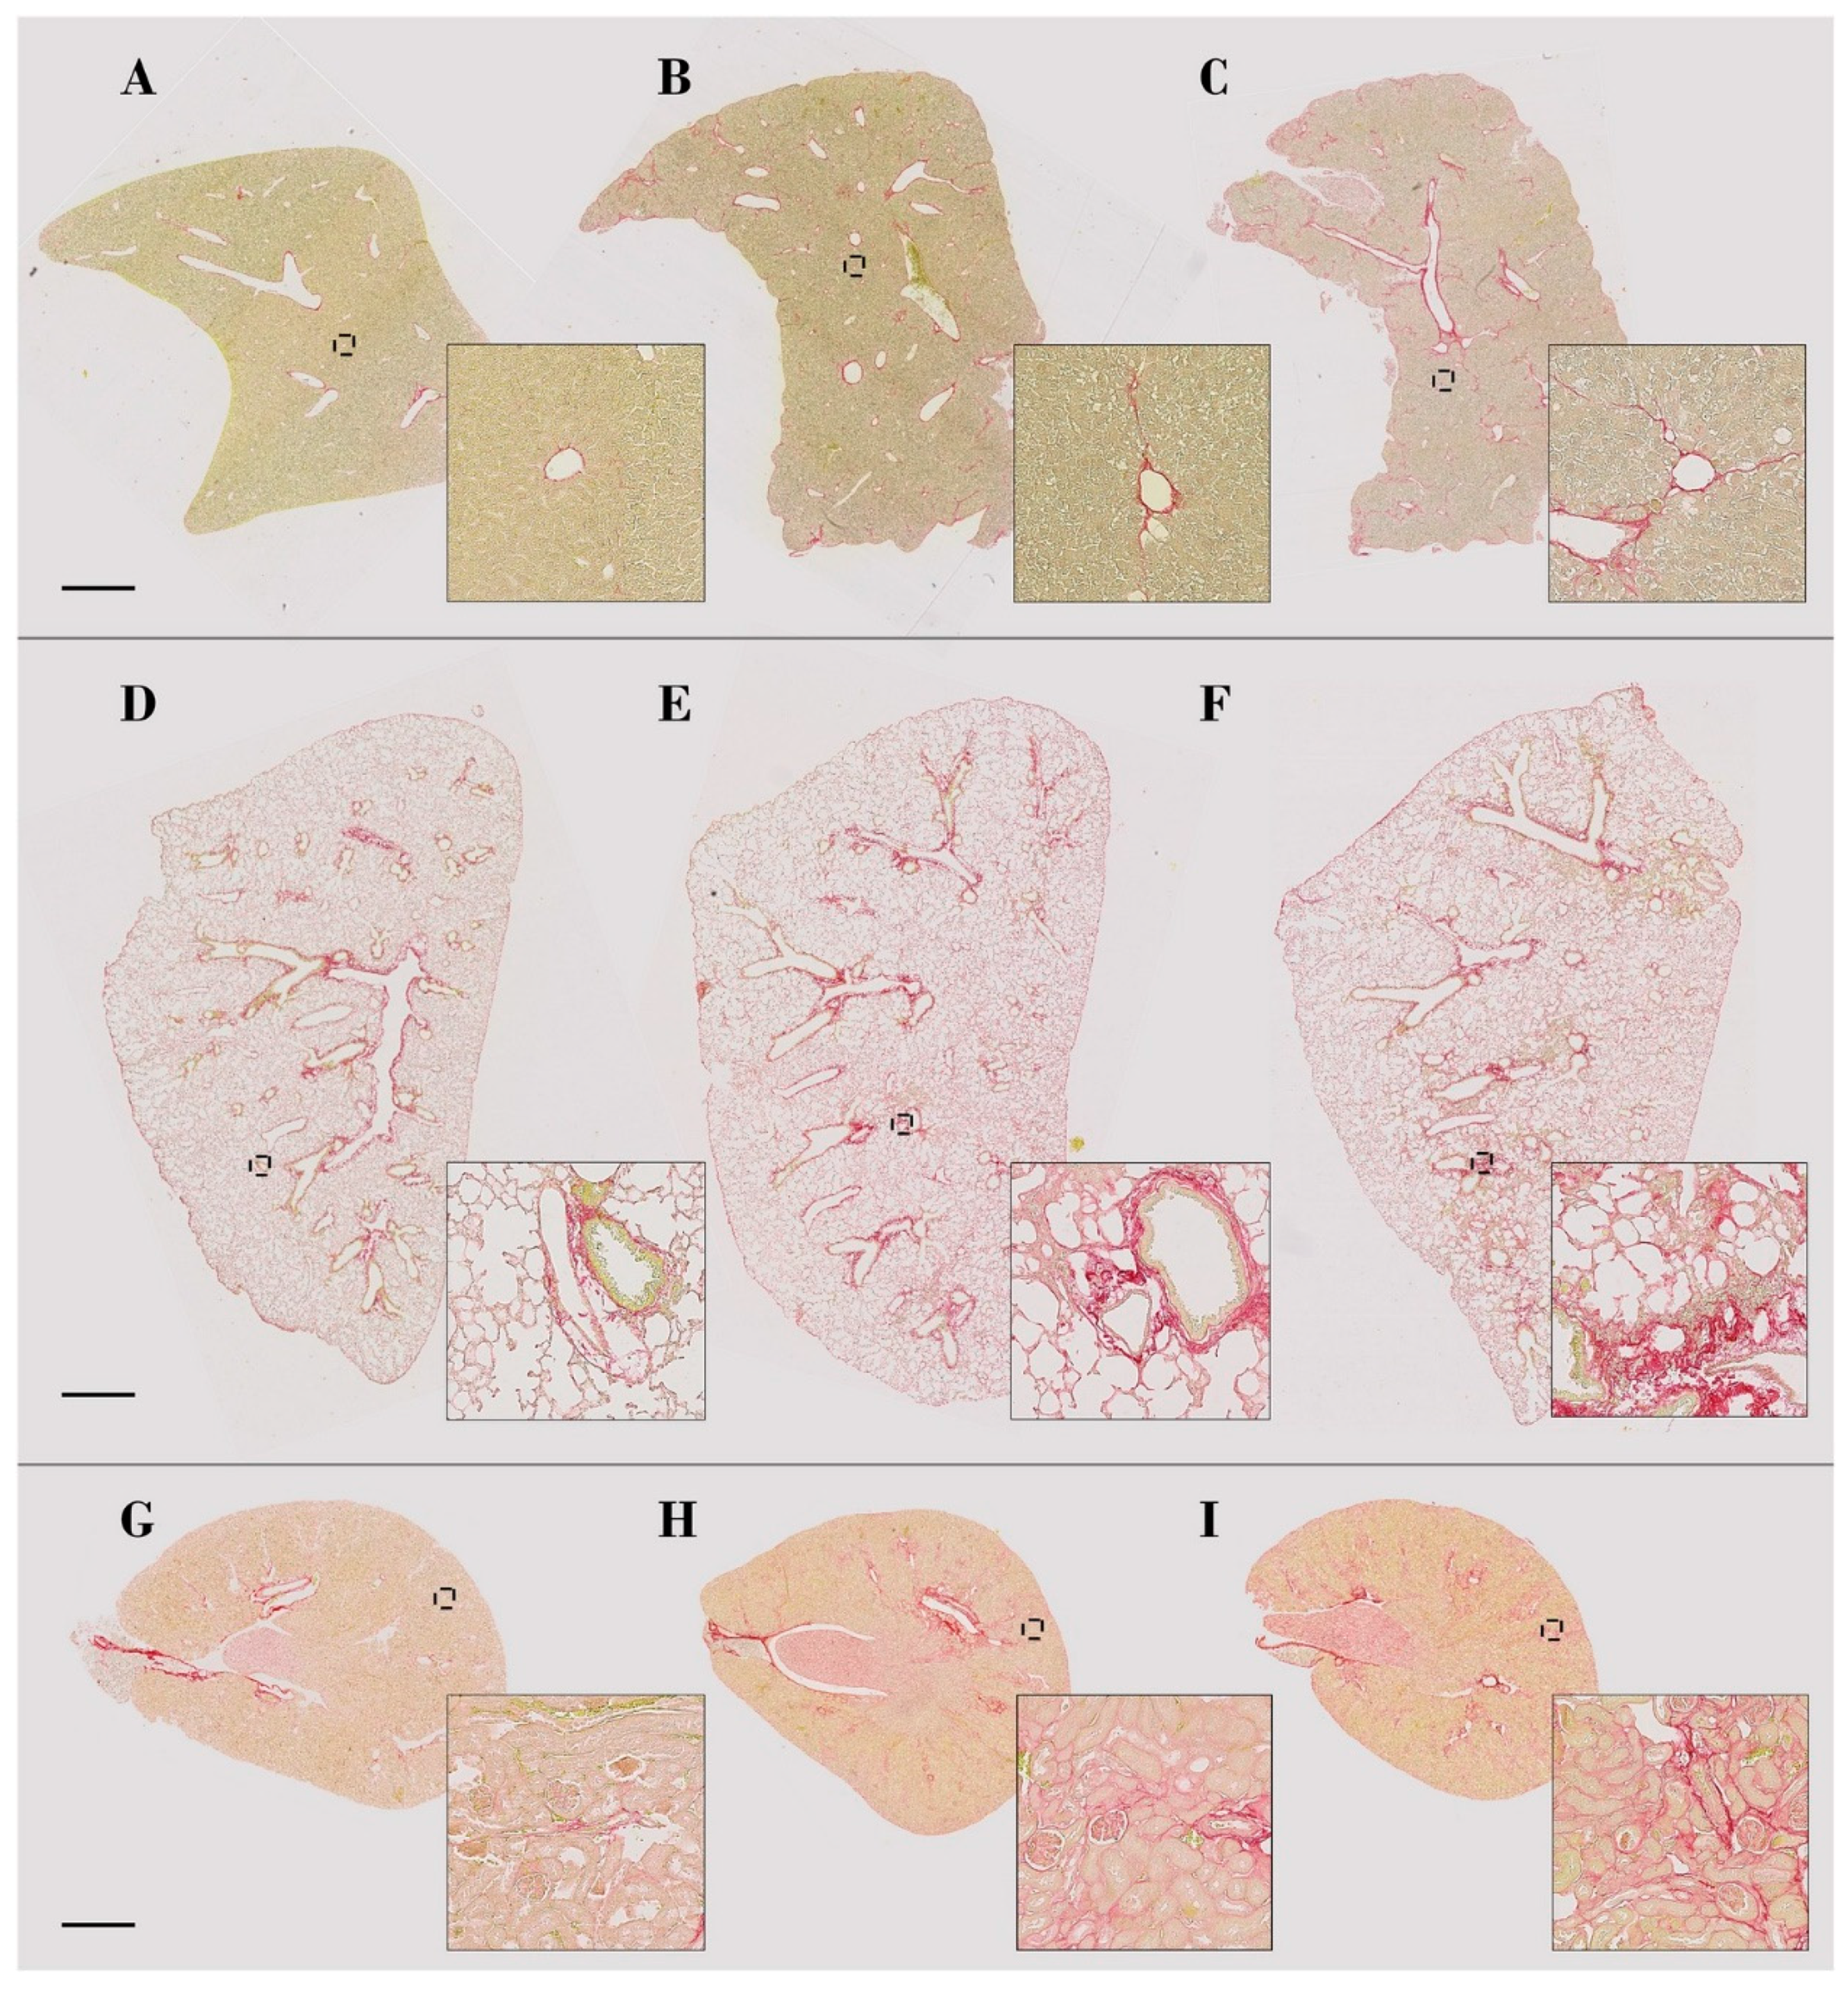 Biomolecules | Free Full-Text | Digital Image Analysis of Picrosirius Red  Staining: A Robust Method for Multi-Organ Fibrosis Quantification and  Characterization